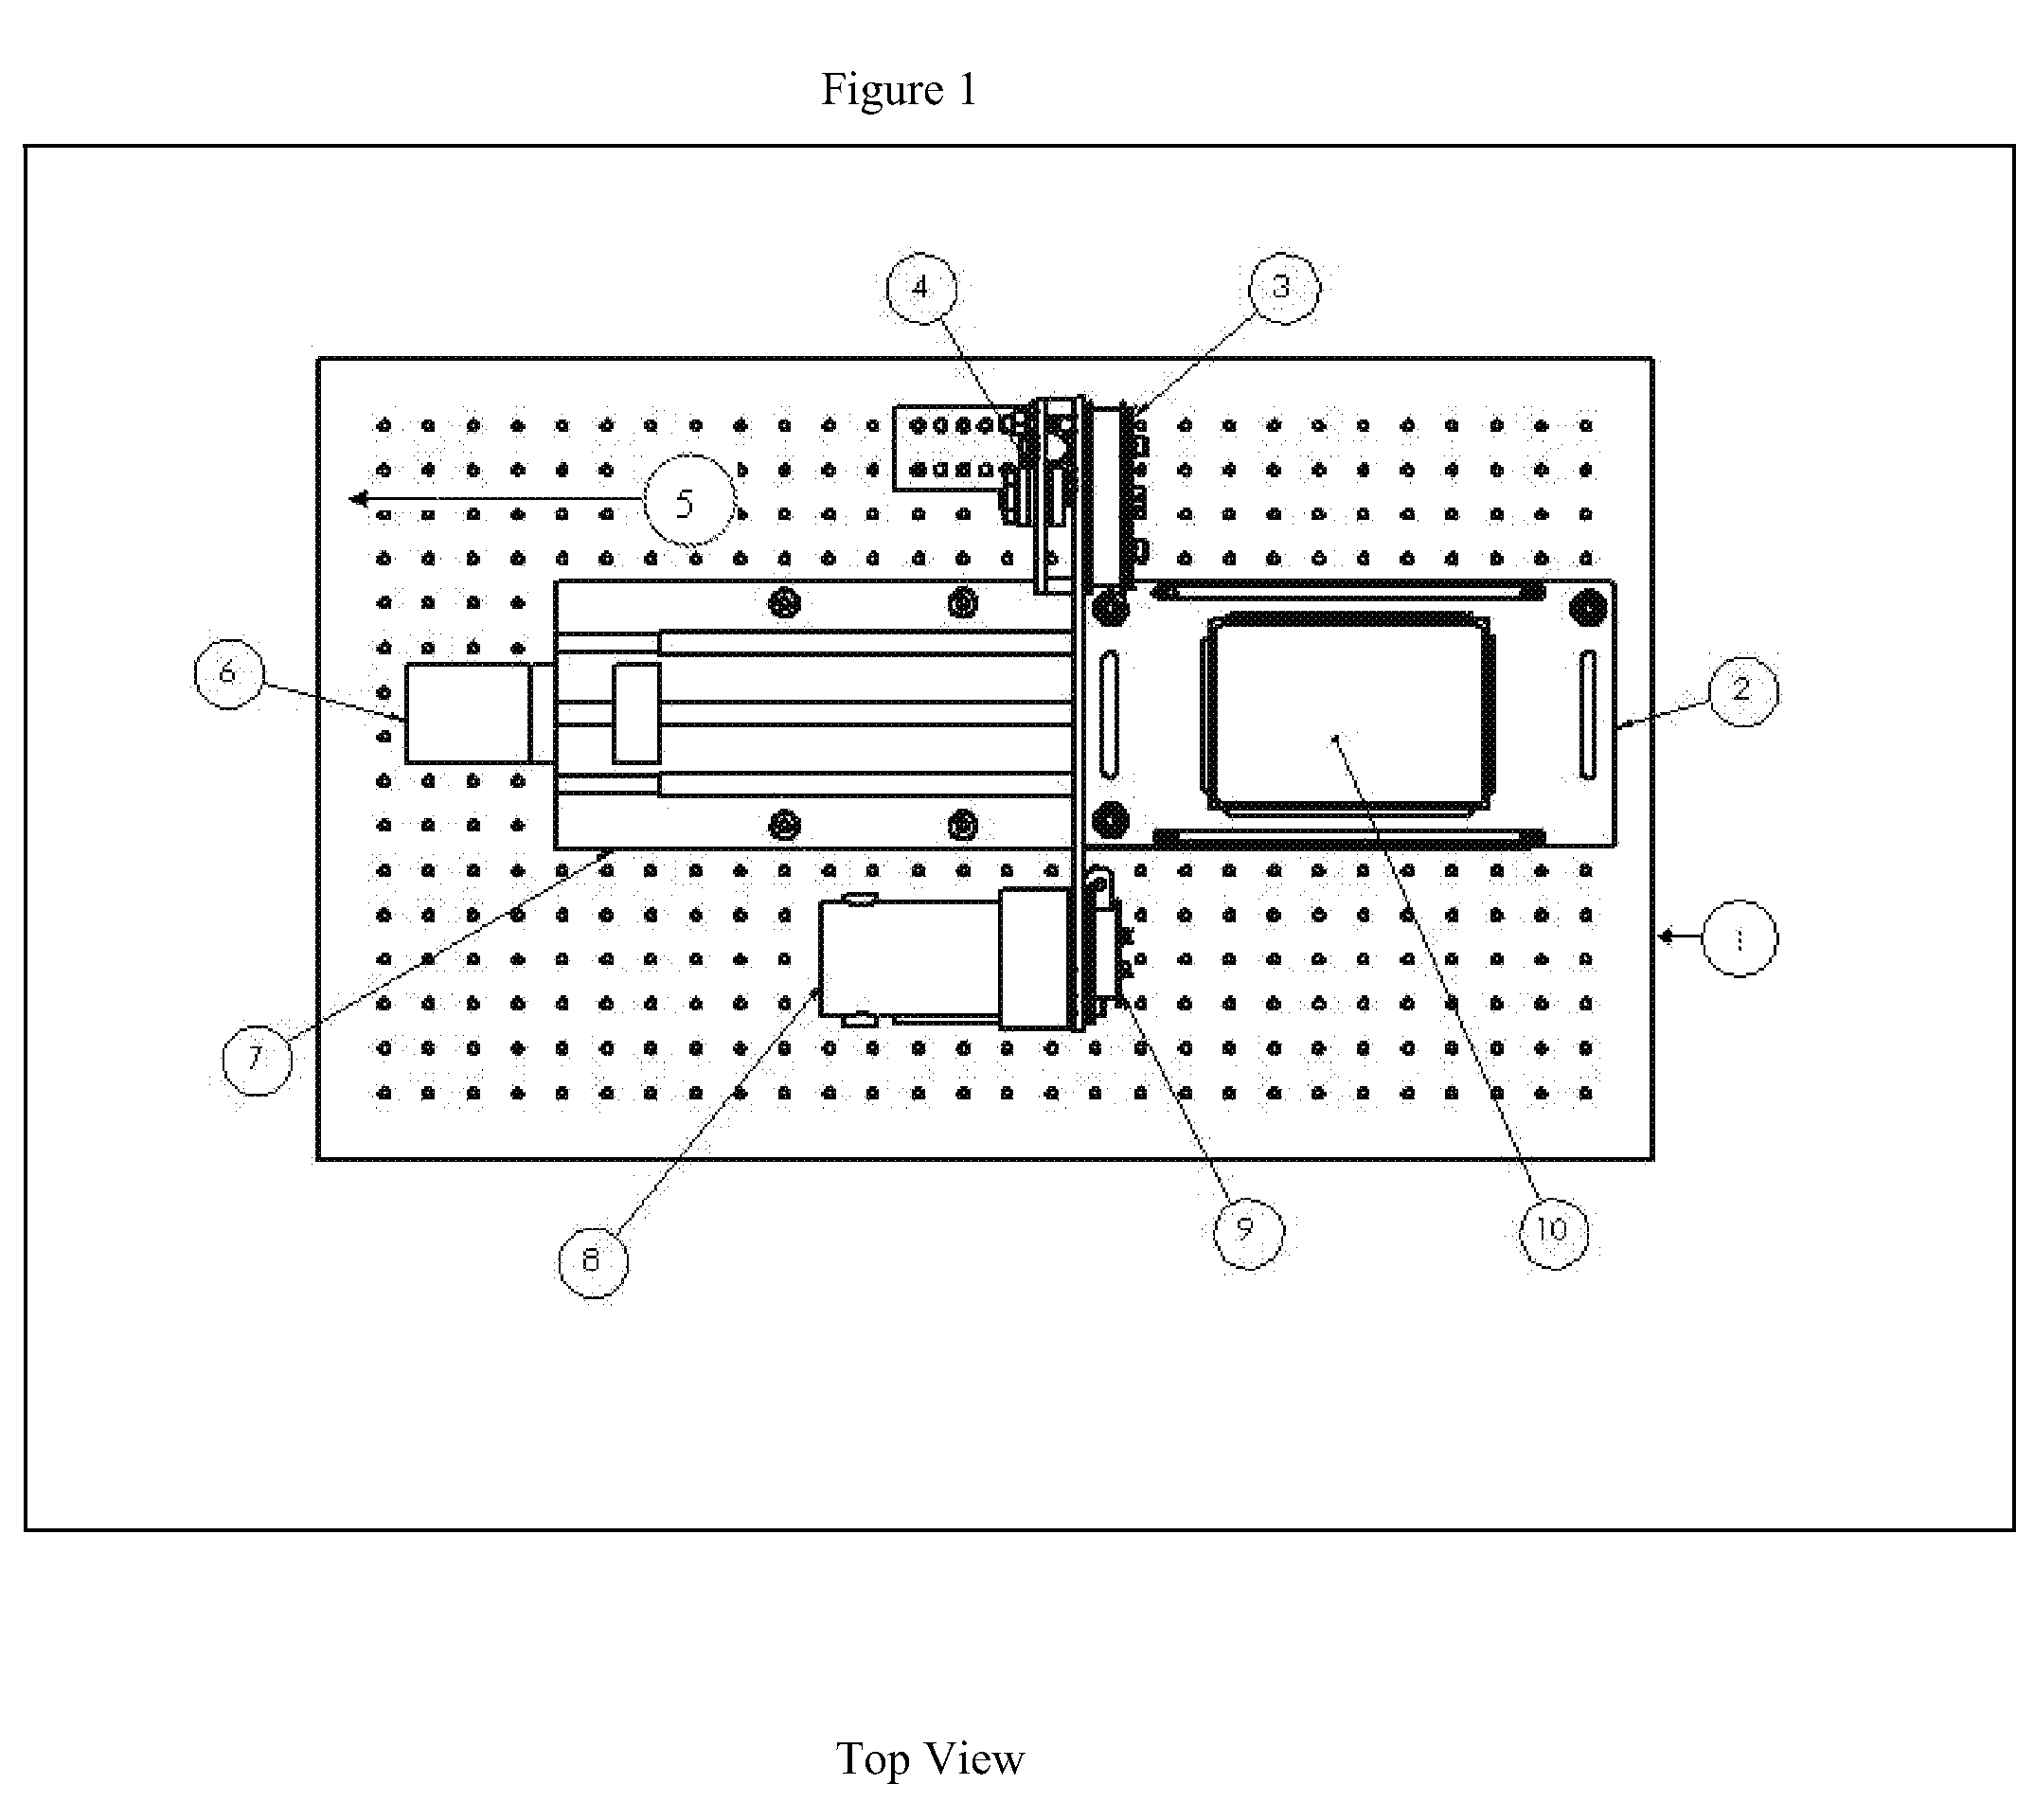 Semi-automated reworkability equipment for de-bonding a display